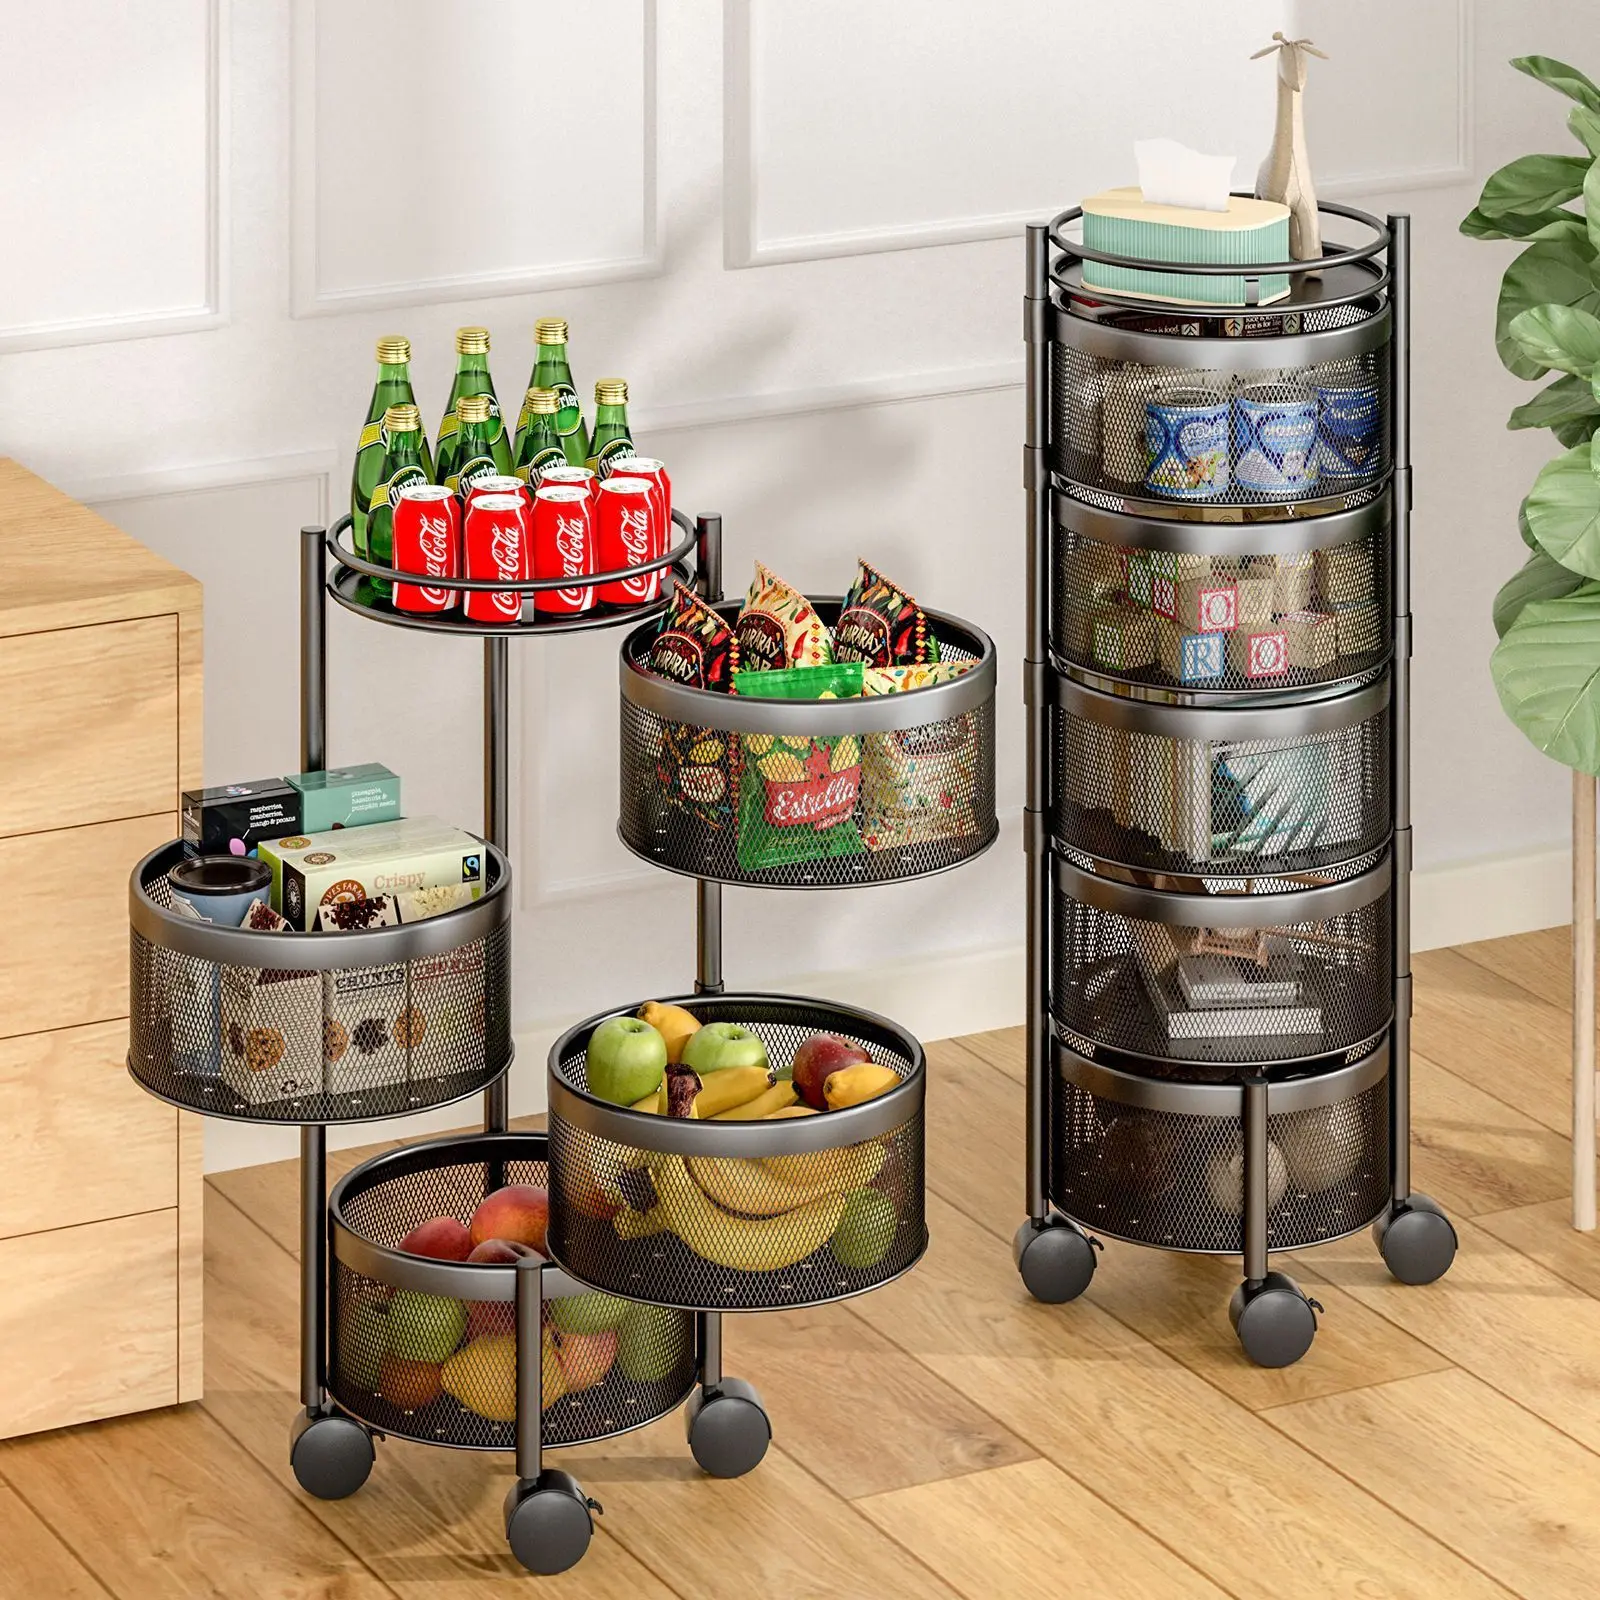 3-Layerd DERGH Round Rotating Cart 360° Kitchen Rotating Storage Rack with Wheels Multi Layered Kitchen Shelf 3 Layered Kitchen Storage Trolleys for Bathroom and Kitchen Use